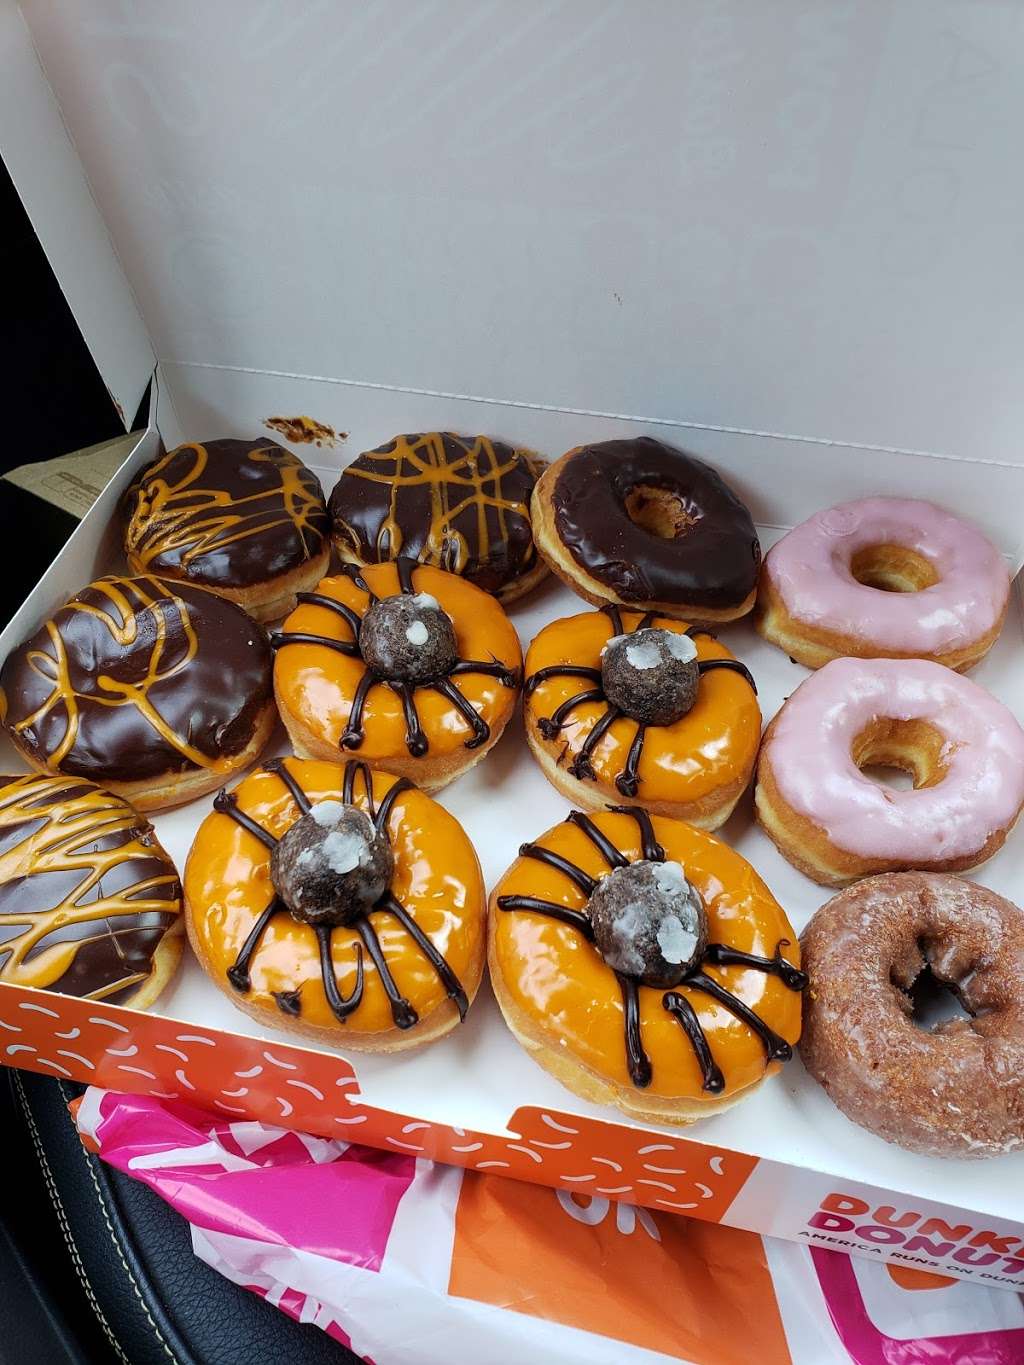 Dunkin Donuts | 7247 Kingery Hwy, Hinsdale, IL 60521 | Phone: (630) 323-5205